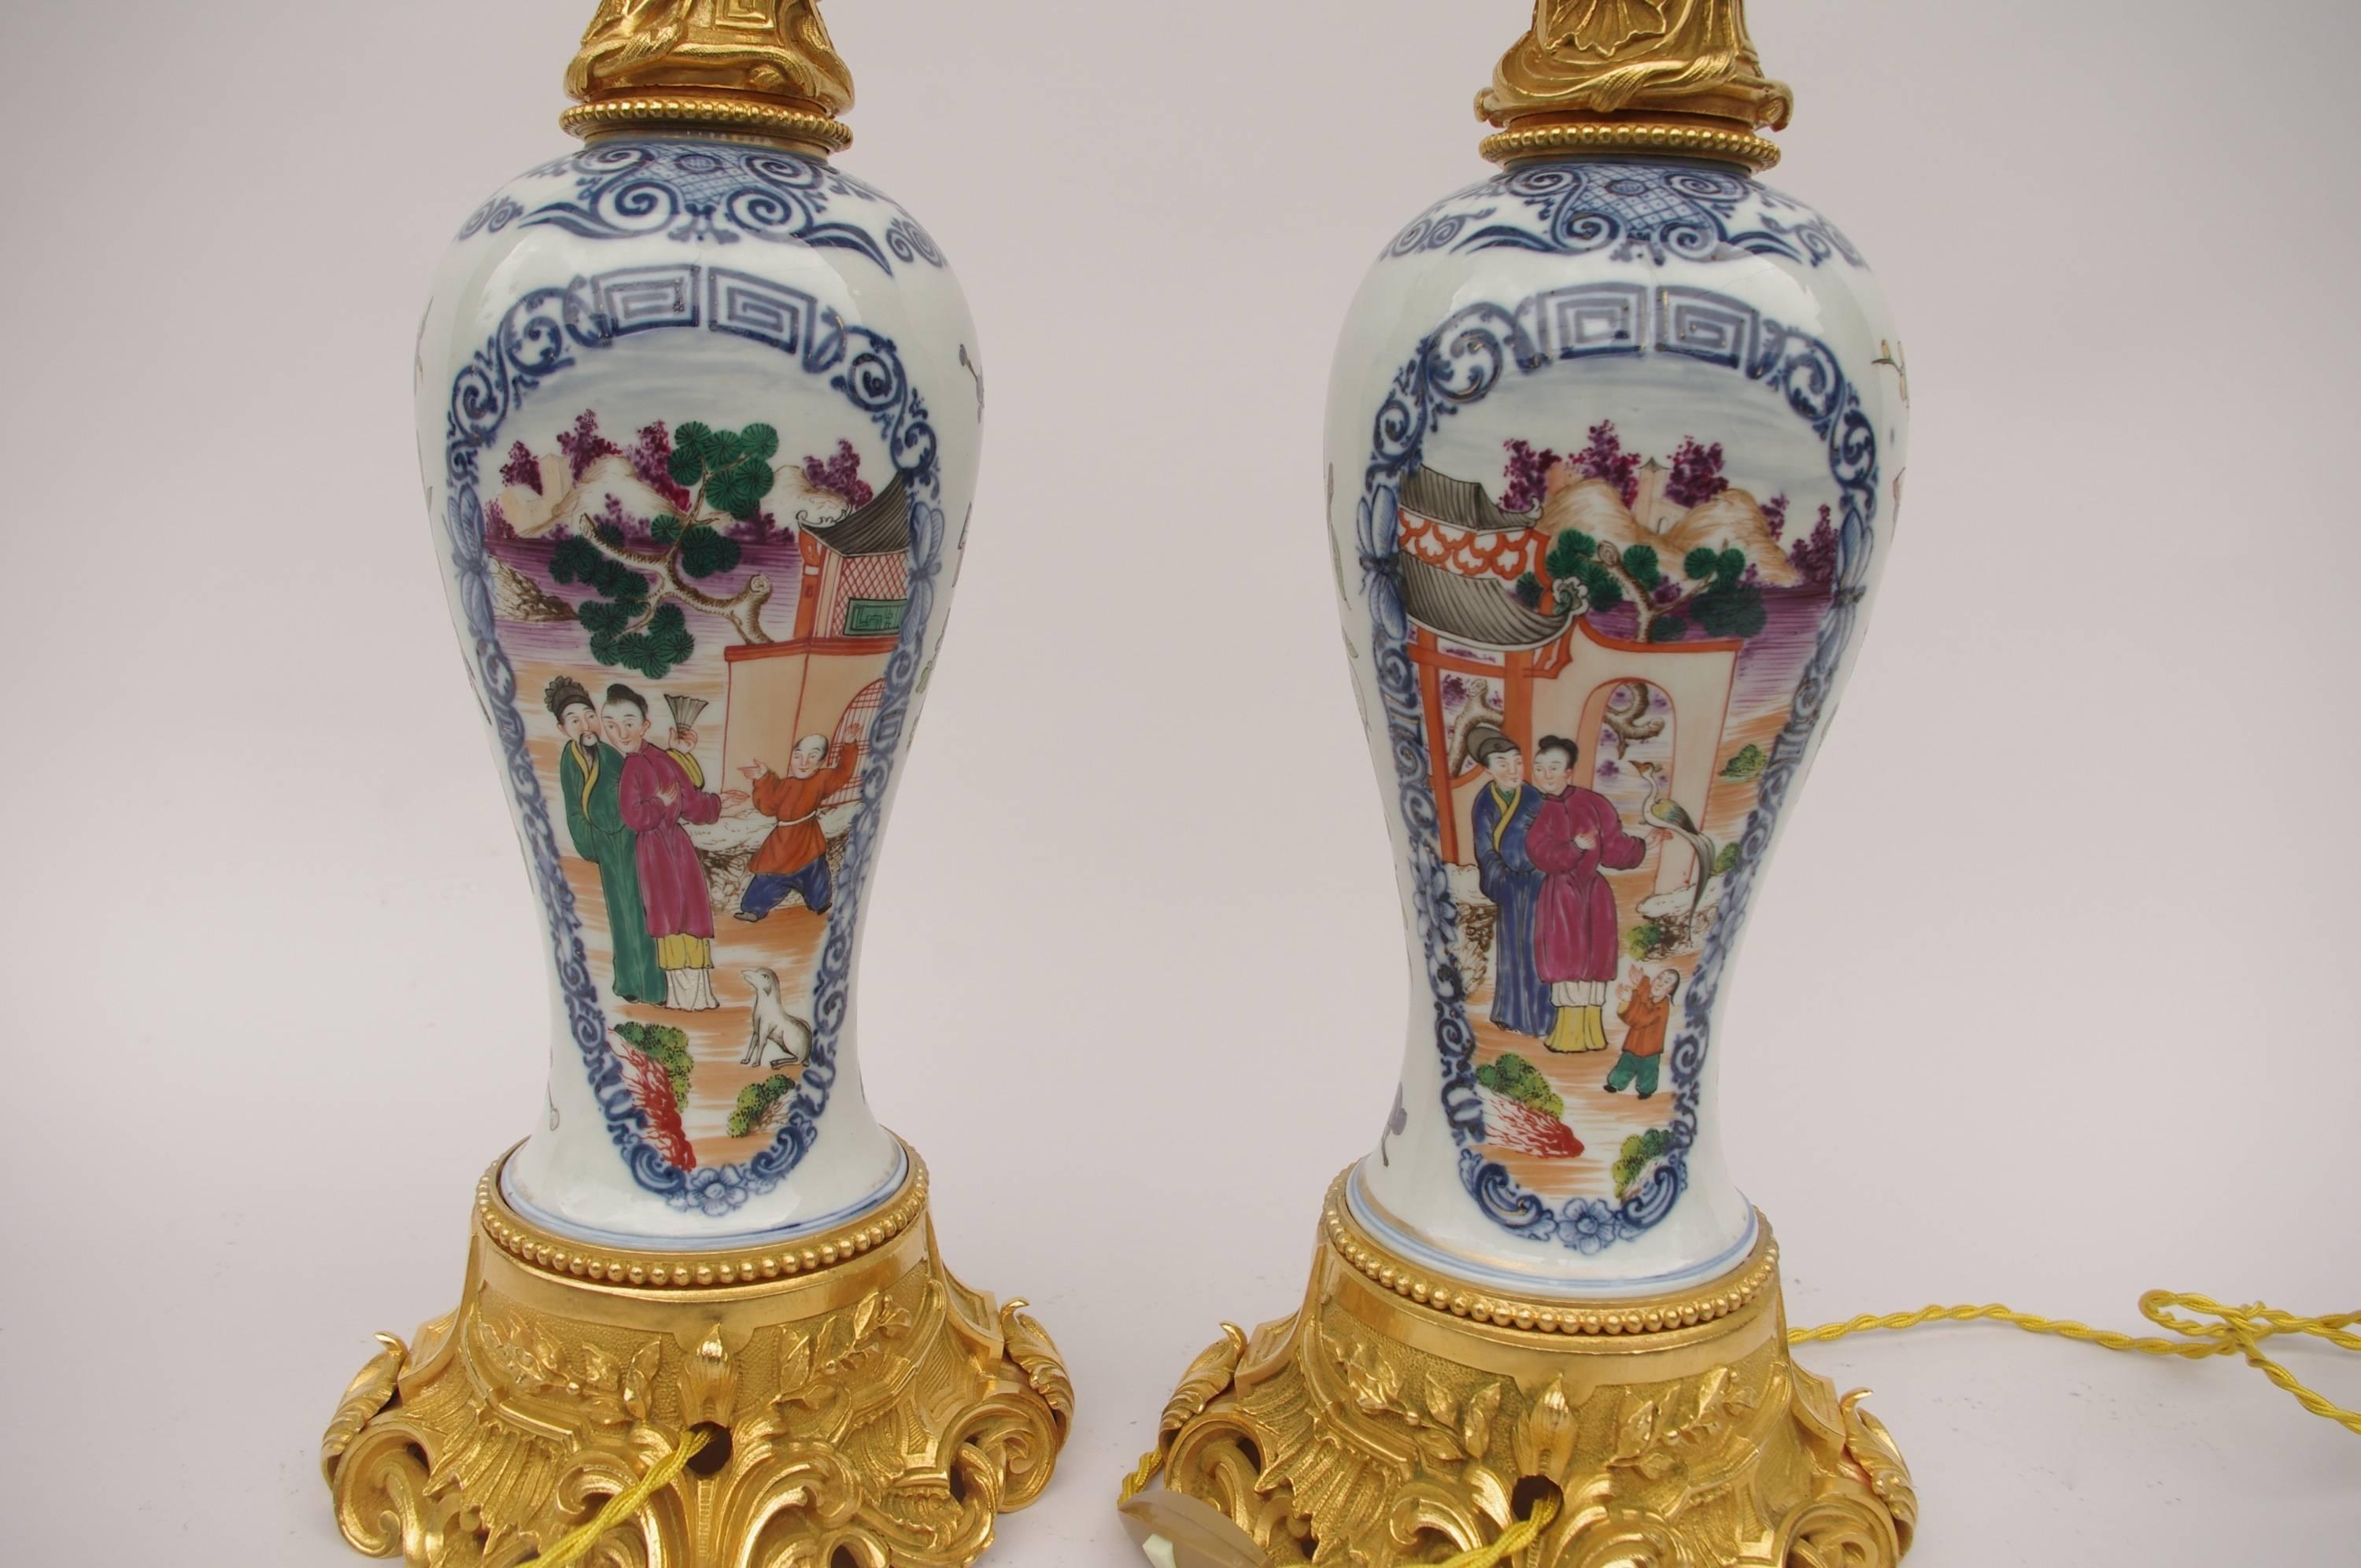 Figures decor. 
Mounted in gilt bronze, Rocaille style.
Made for electricity,
circa 1880.
Quianlong porcelain period, 18th century, from Canton.
Color of the shades can be changed, and we can make the electricity for the U.S.